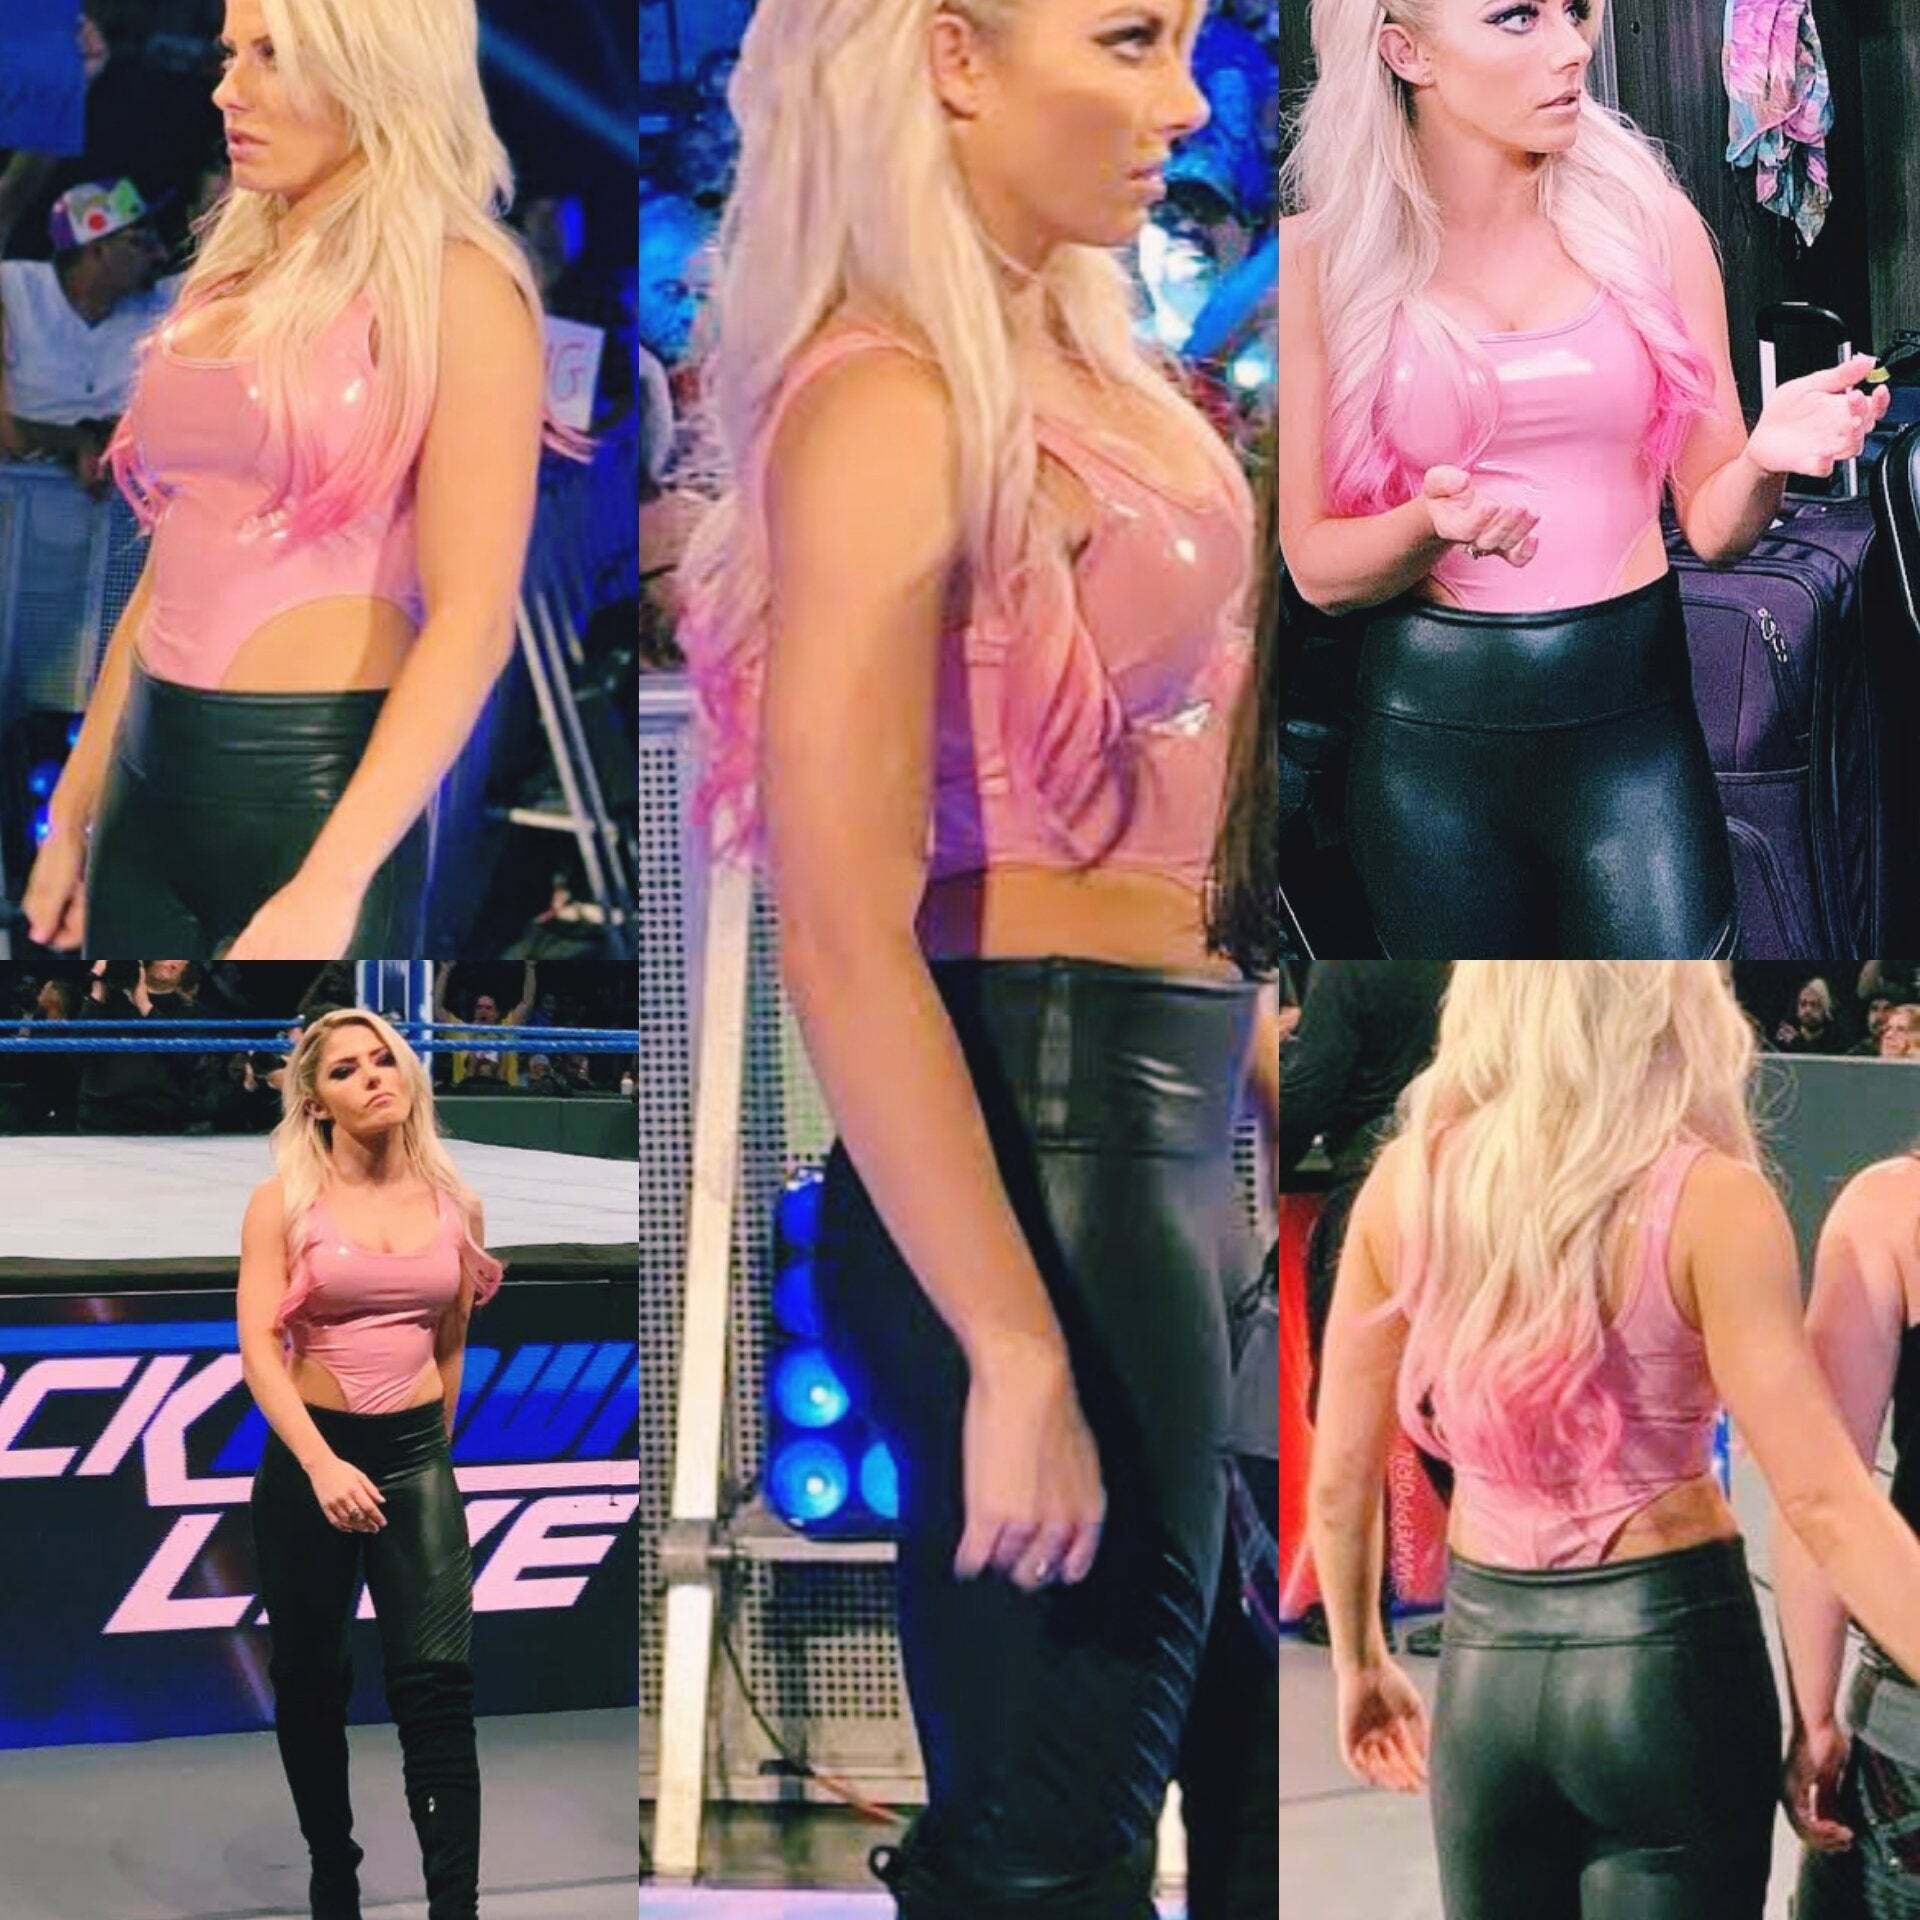 Imagine if Alexa Bliss wore this outfit without the leather pants?